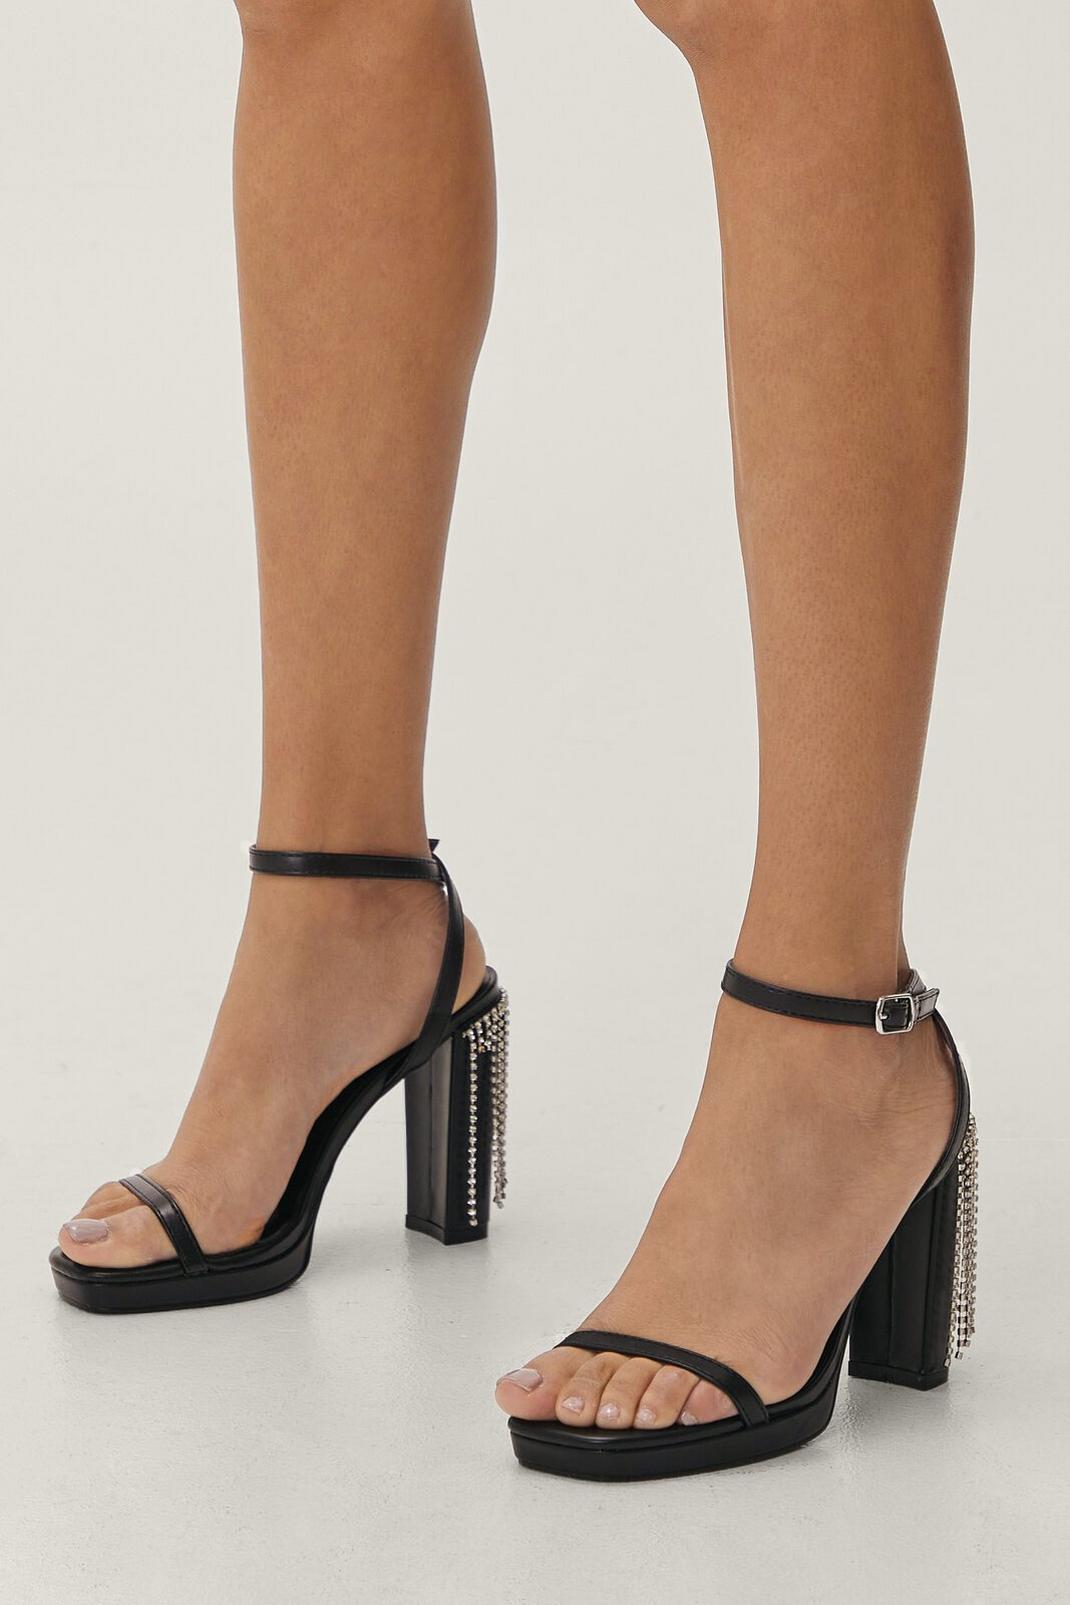 Black Faux Leather Strappy Diamante Fringe Heels image number 1